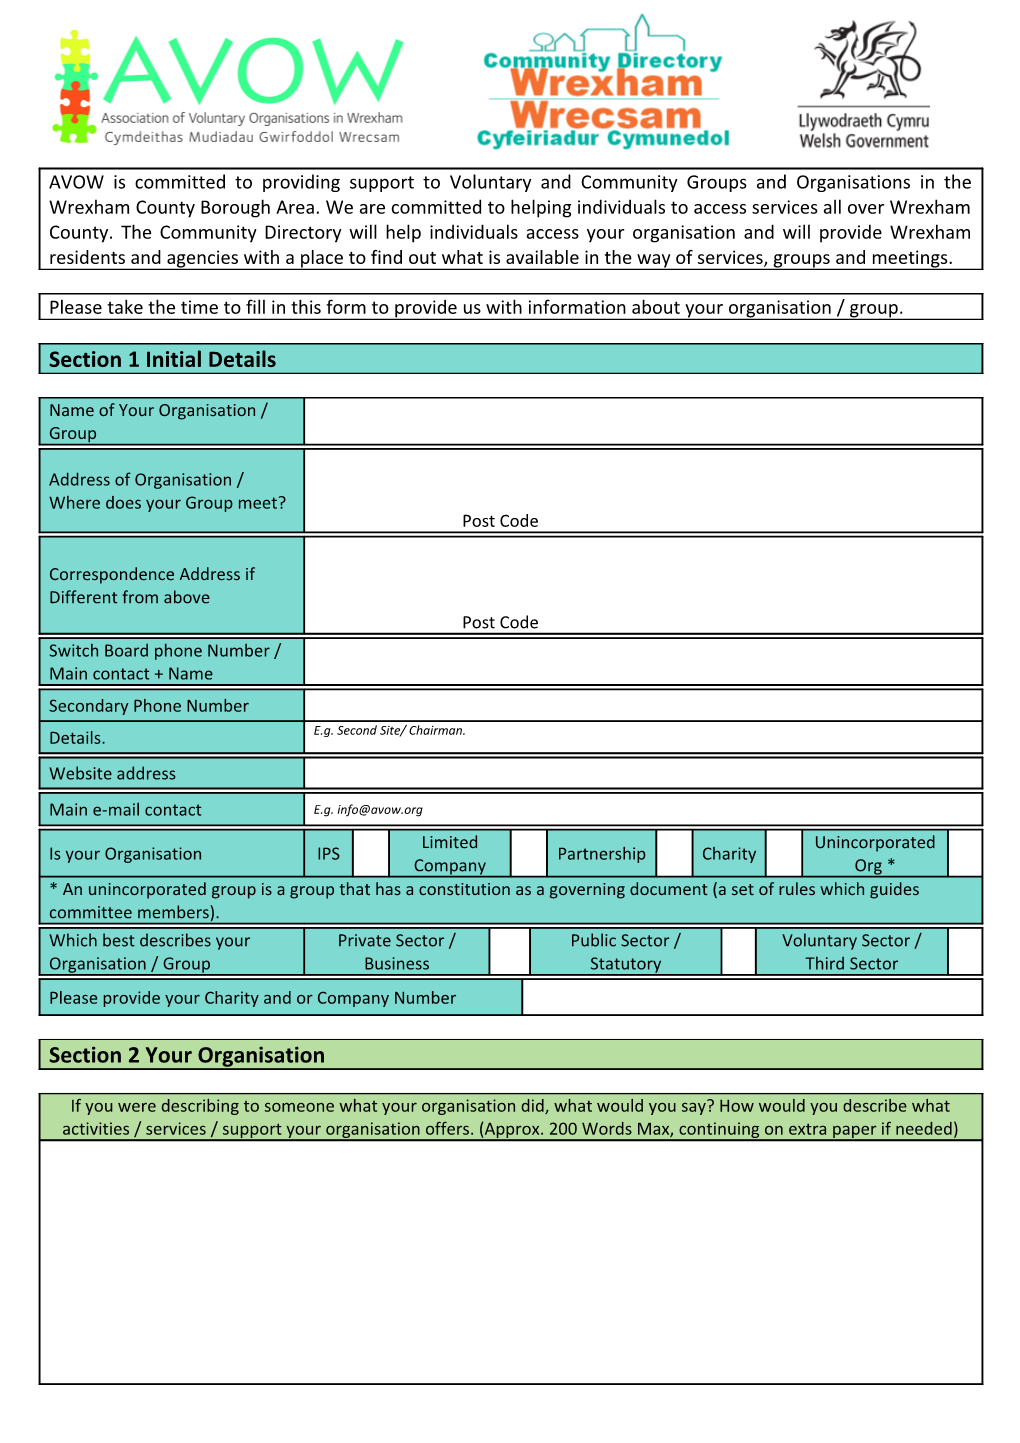 Please Forward This Information Toor Return This Form in the Post to